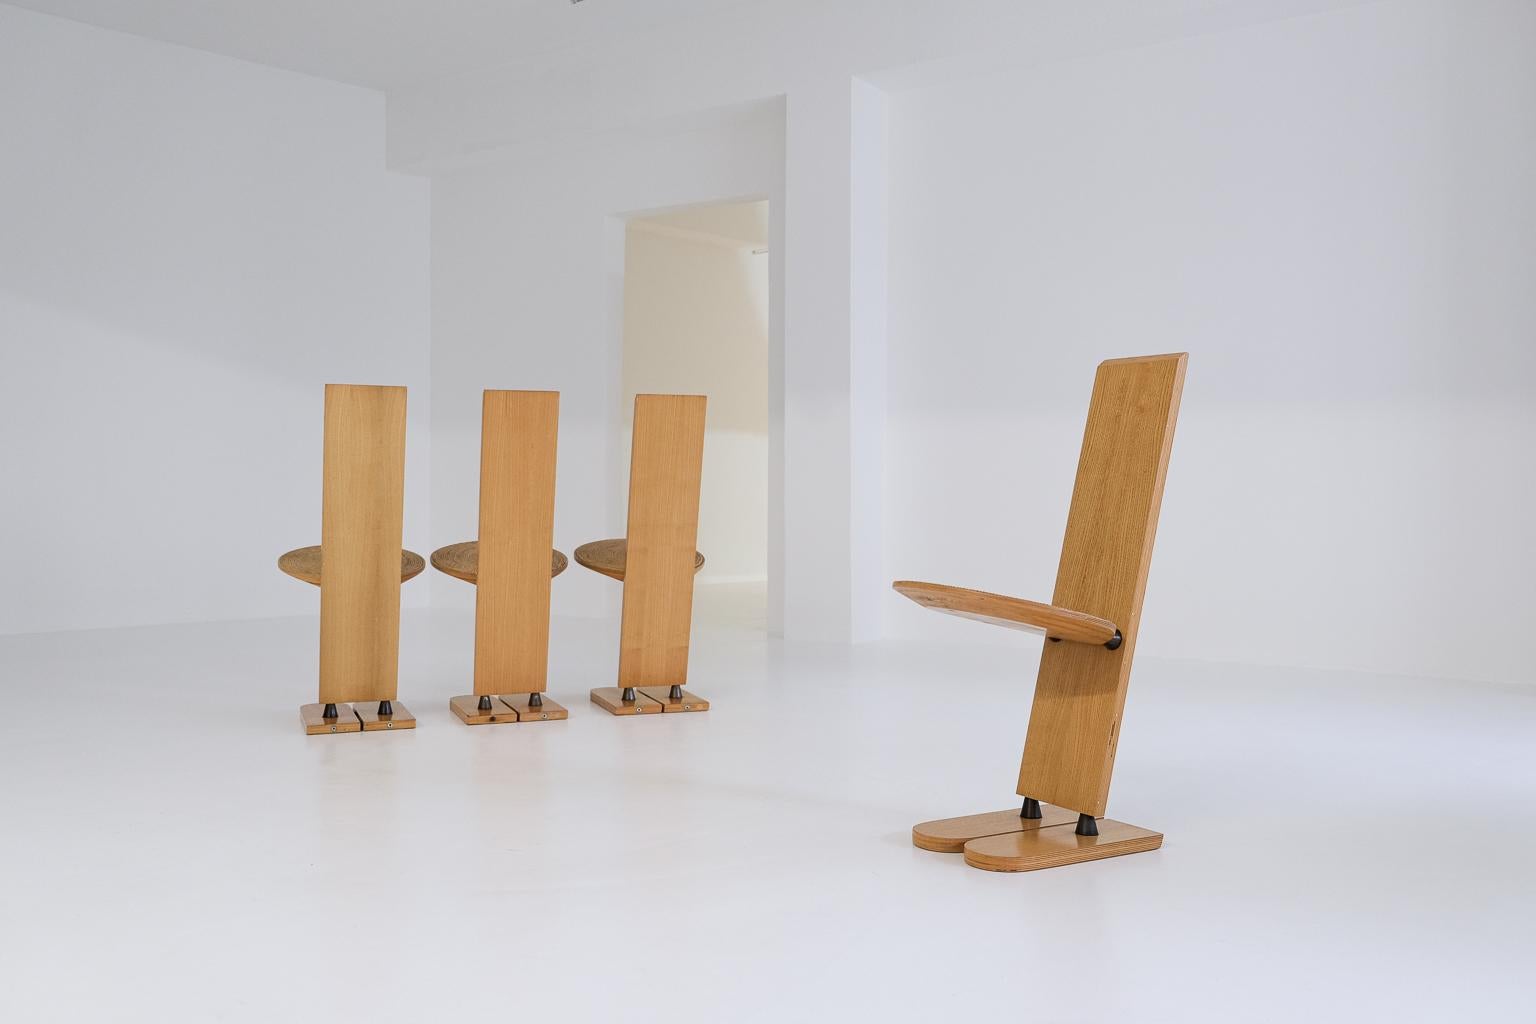 Italian Set of 4 Pala Dining Chairs by Gigi Sabadin for Emme, Italy, 1973 For Sale